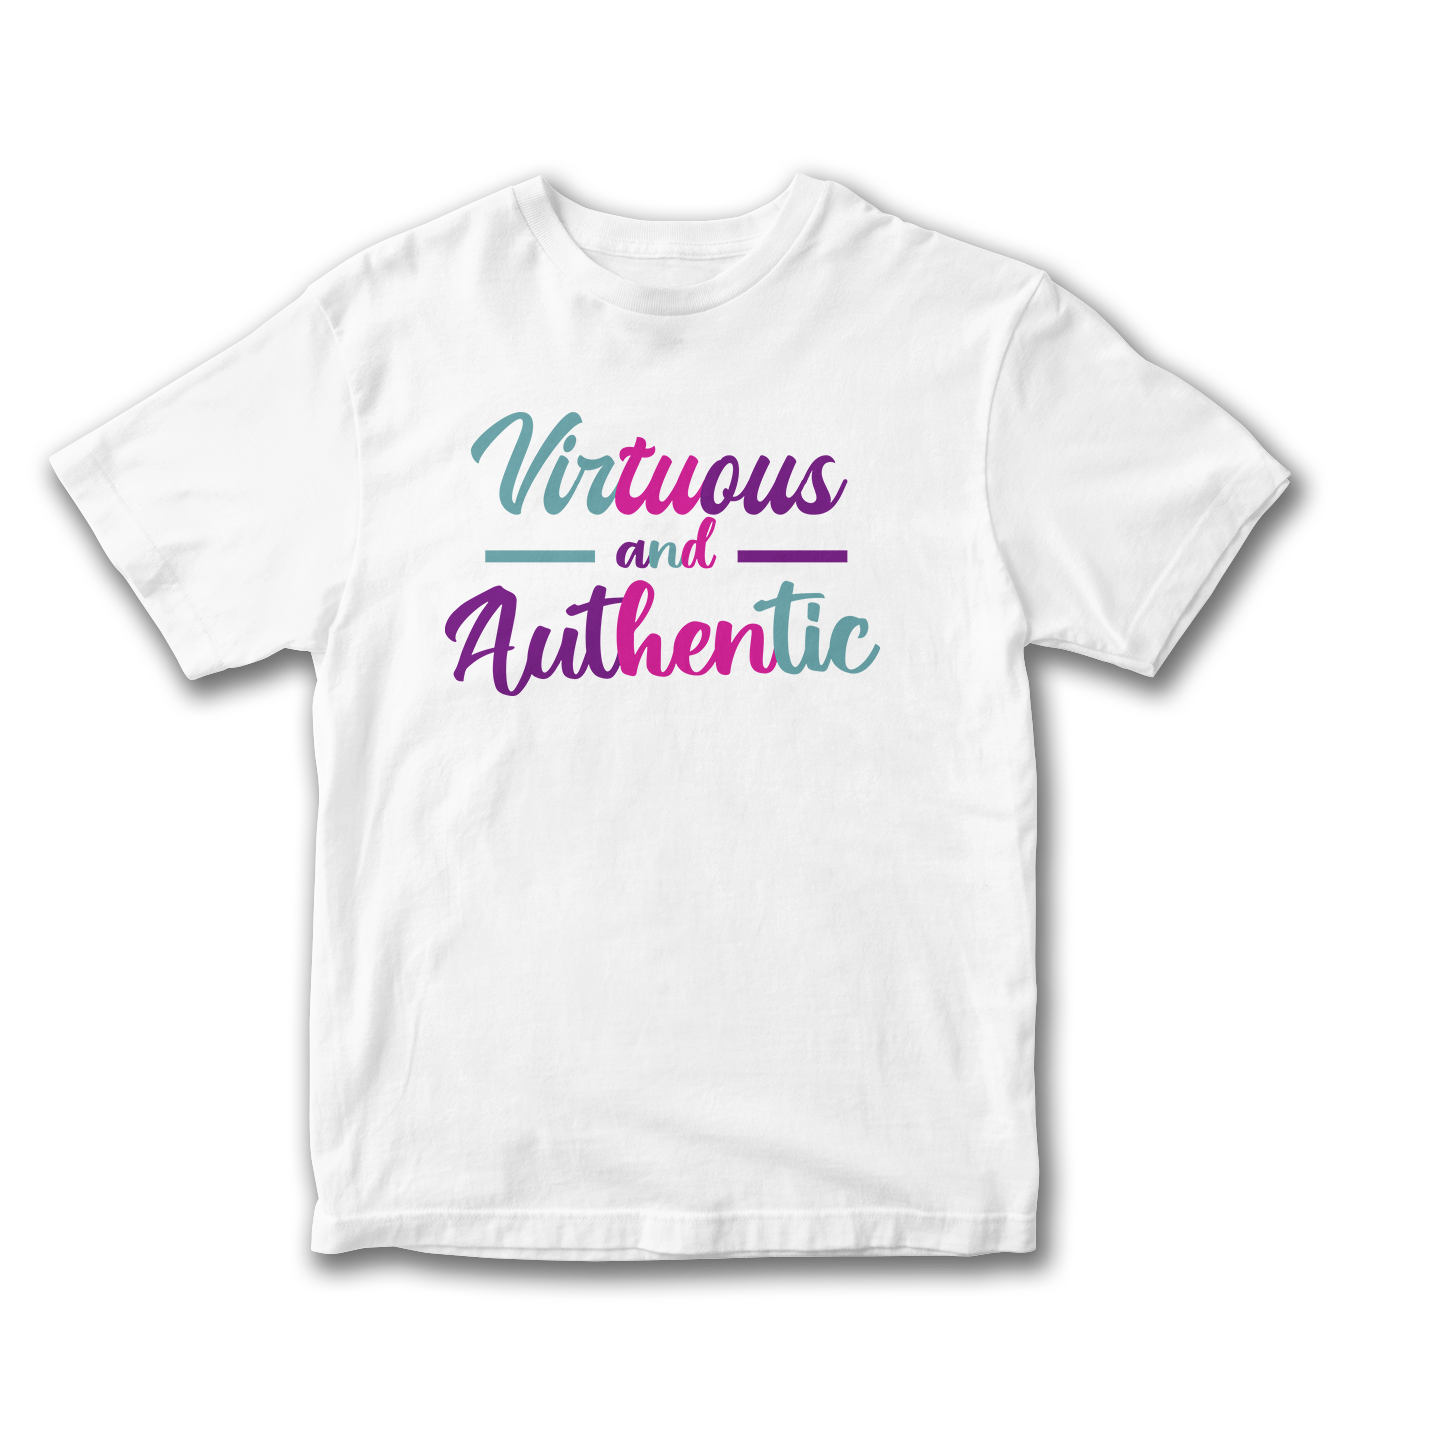 Virtuous and Authentic Shirt